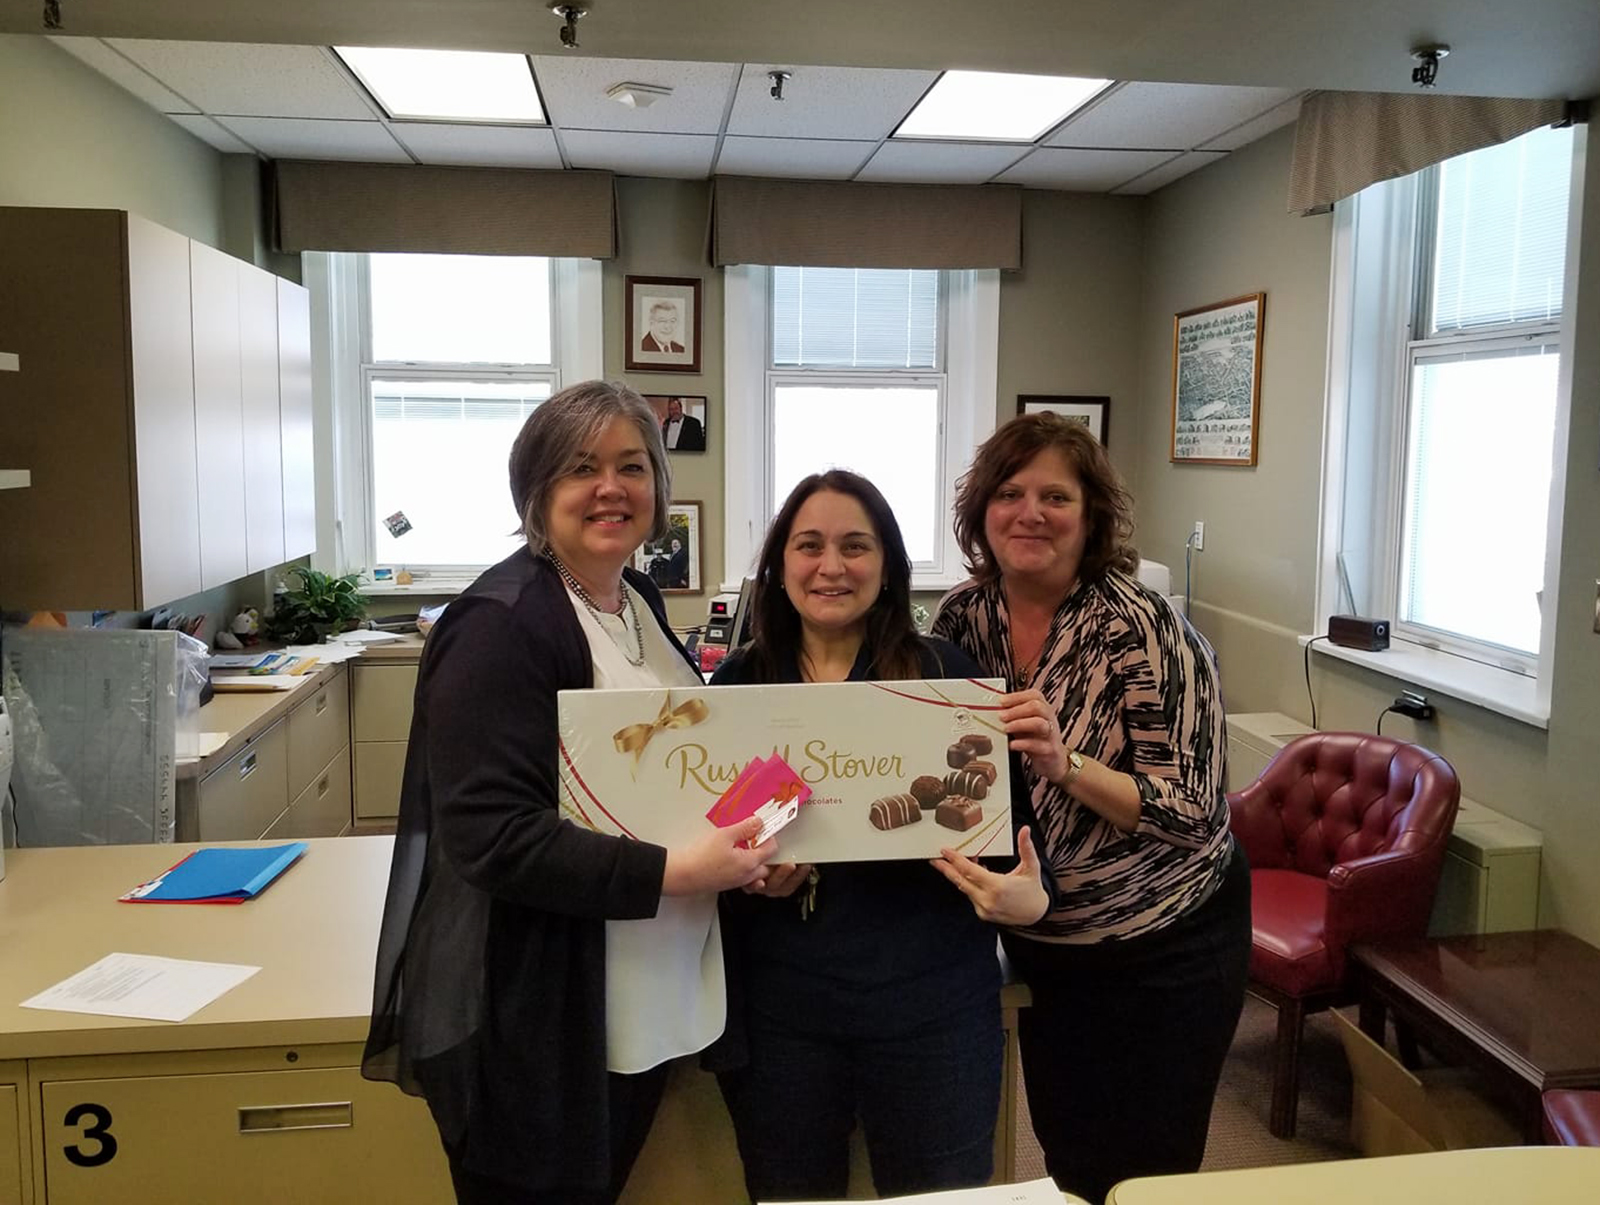 PHOTO: In honor of Las Vegas victim Jenny Parks, Tommy Maher gave chocolates and gift cards to  Kathleen, Ivanna and Lois at the Rockville Village Hall Mayor's office, during his 9500-mile journey.